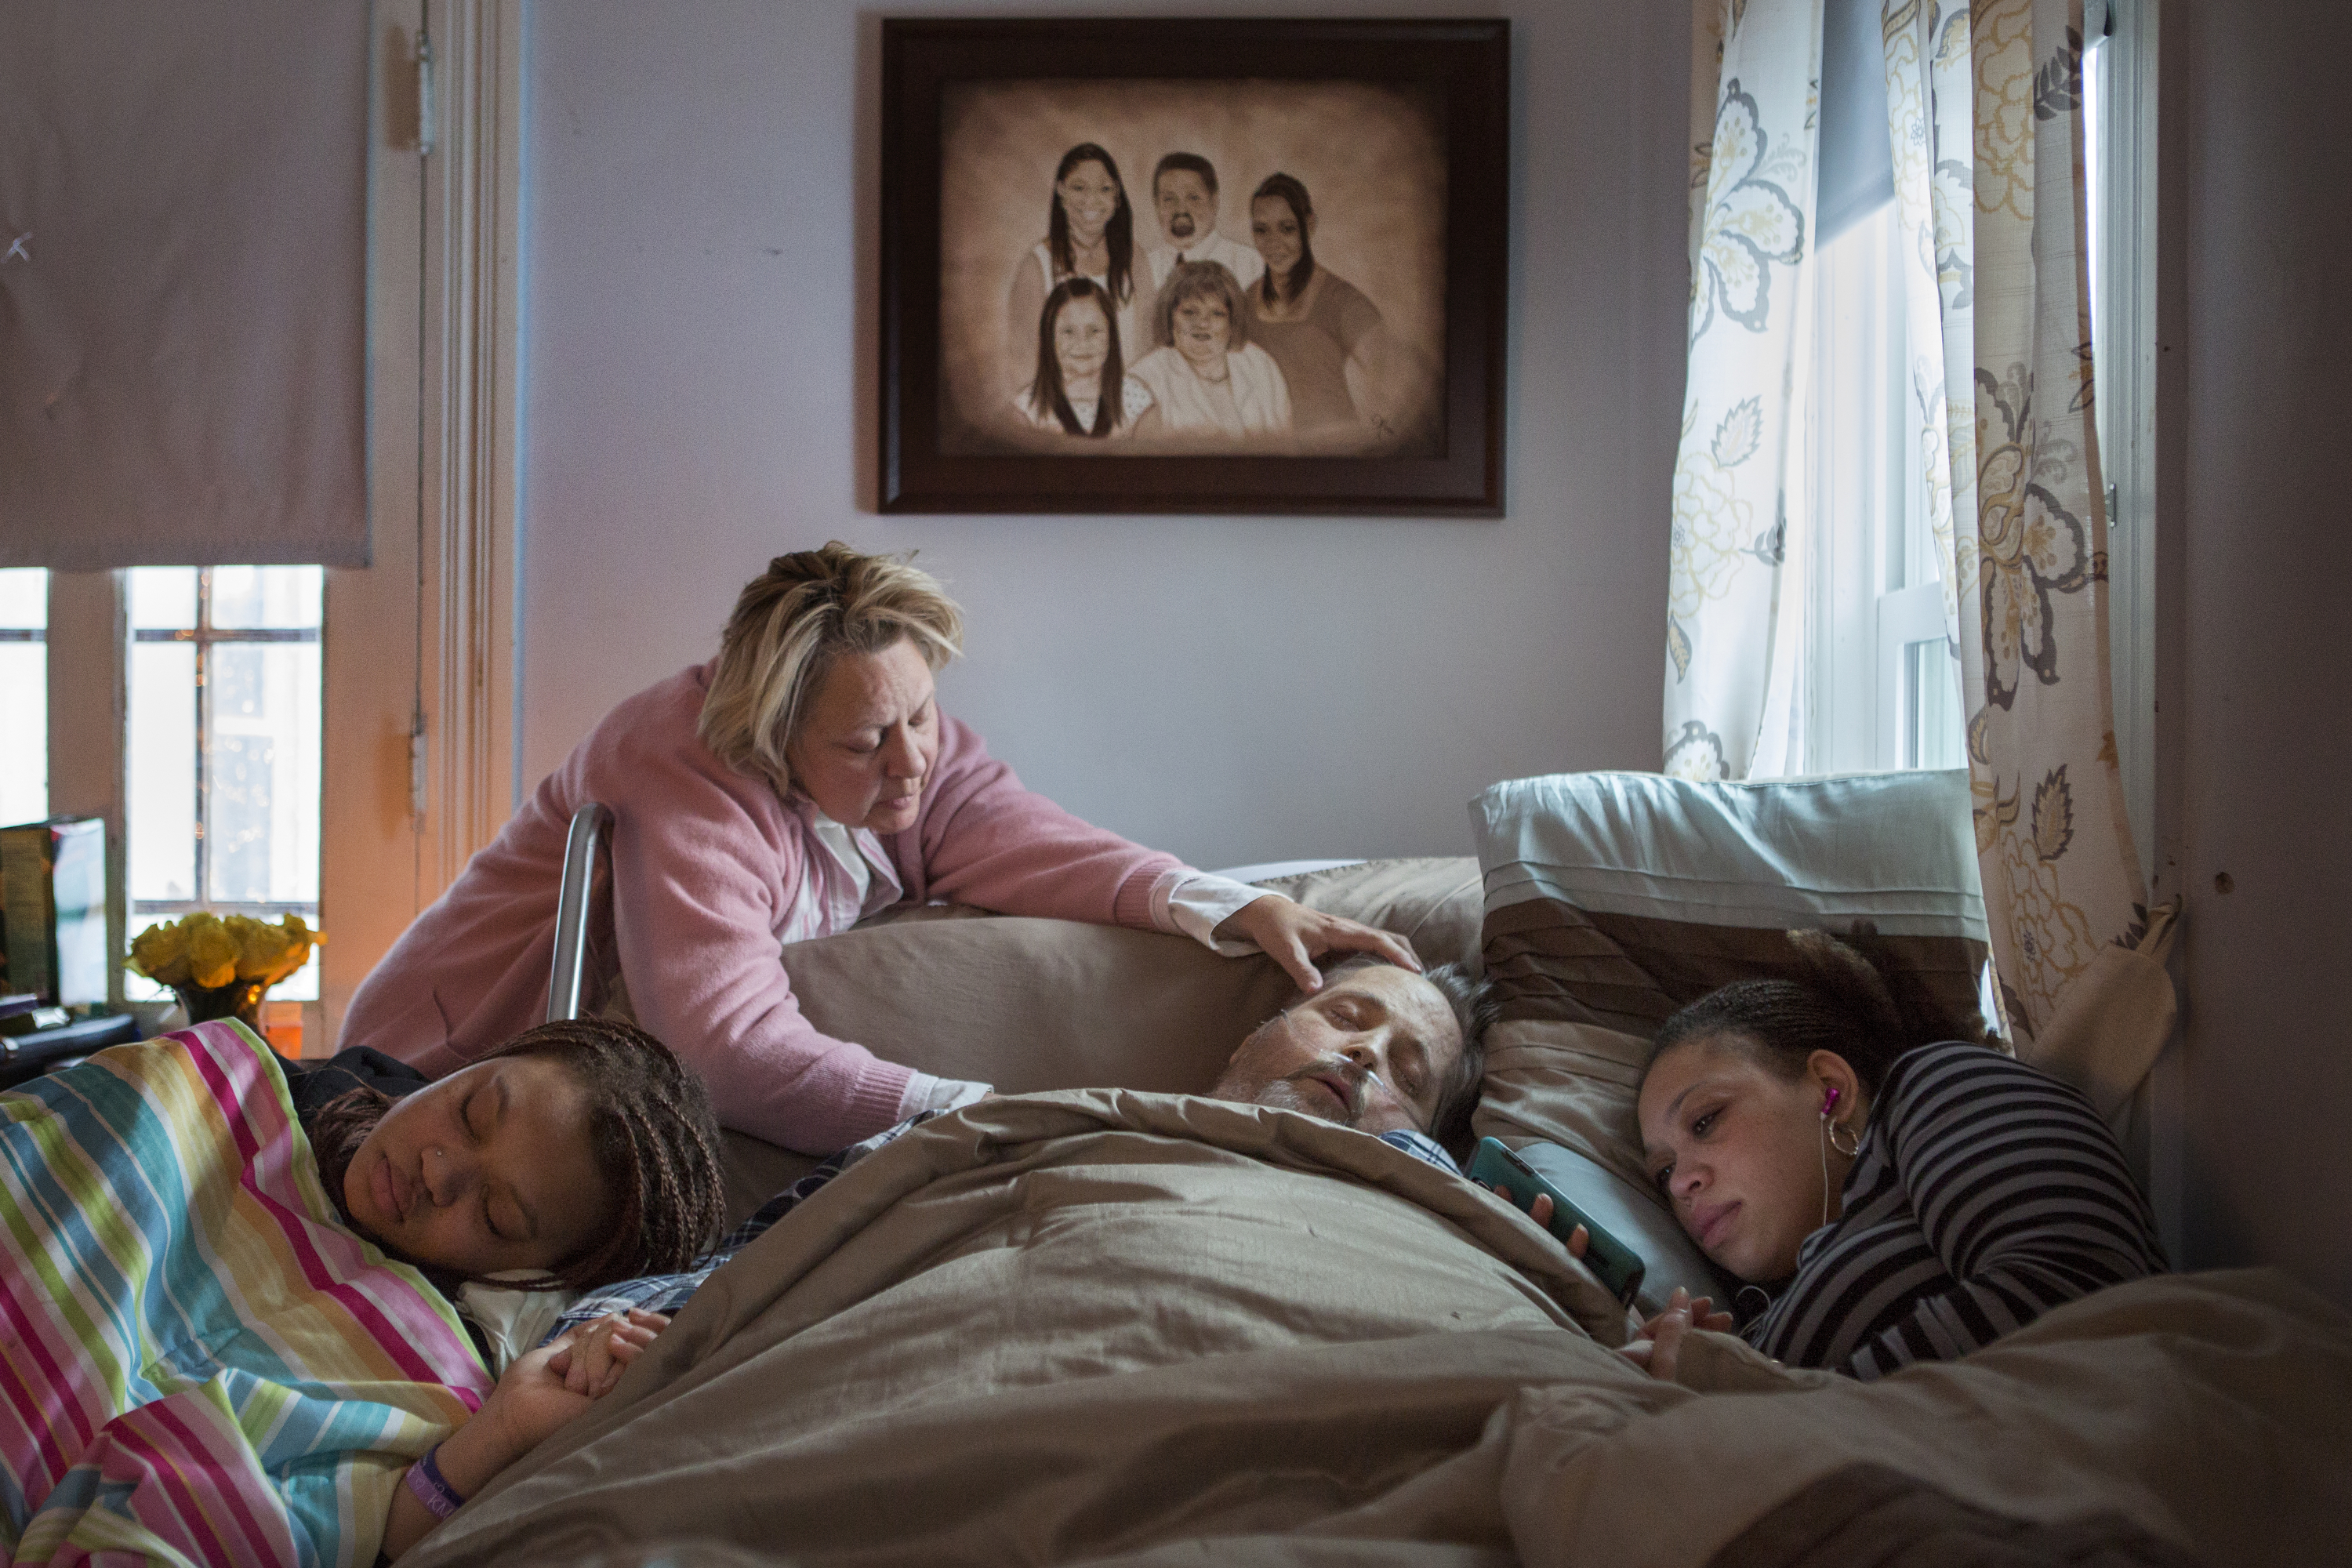 Dan Nagele, center, lays in bed while on hospice care, as adopted daughter Kyra Nagele, left, Yvonne Guest, middle, and daughter Shanna Cunningham, right, console Dan during his final hours shortly before passing away on Monday, February 16, 2015 in Avon, N.Y.  Dan's wife, Loretta passed away in 2009 to cancer, leaving Kyra and Shanna orphaned.  Dan suffered from Nonalcoholic Steatohepatitis disease, (NASH) which is a fatal liver disease that resembles alcohol liver disease, but occurs in people who drink little or no alcohol.